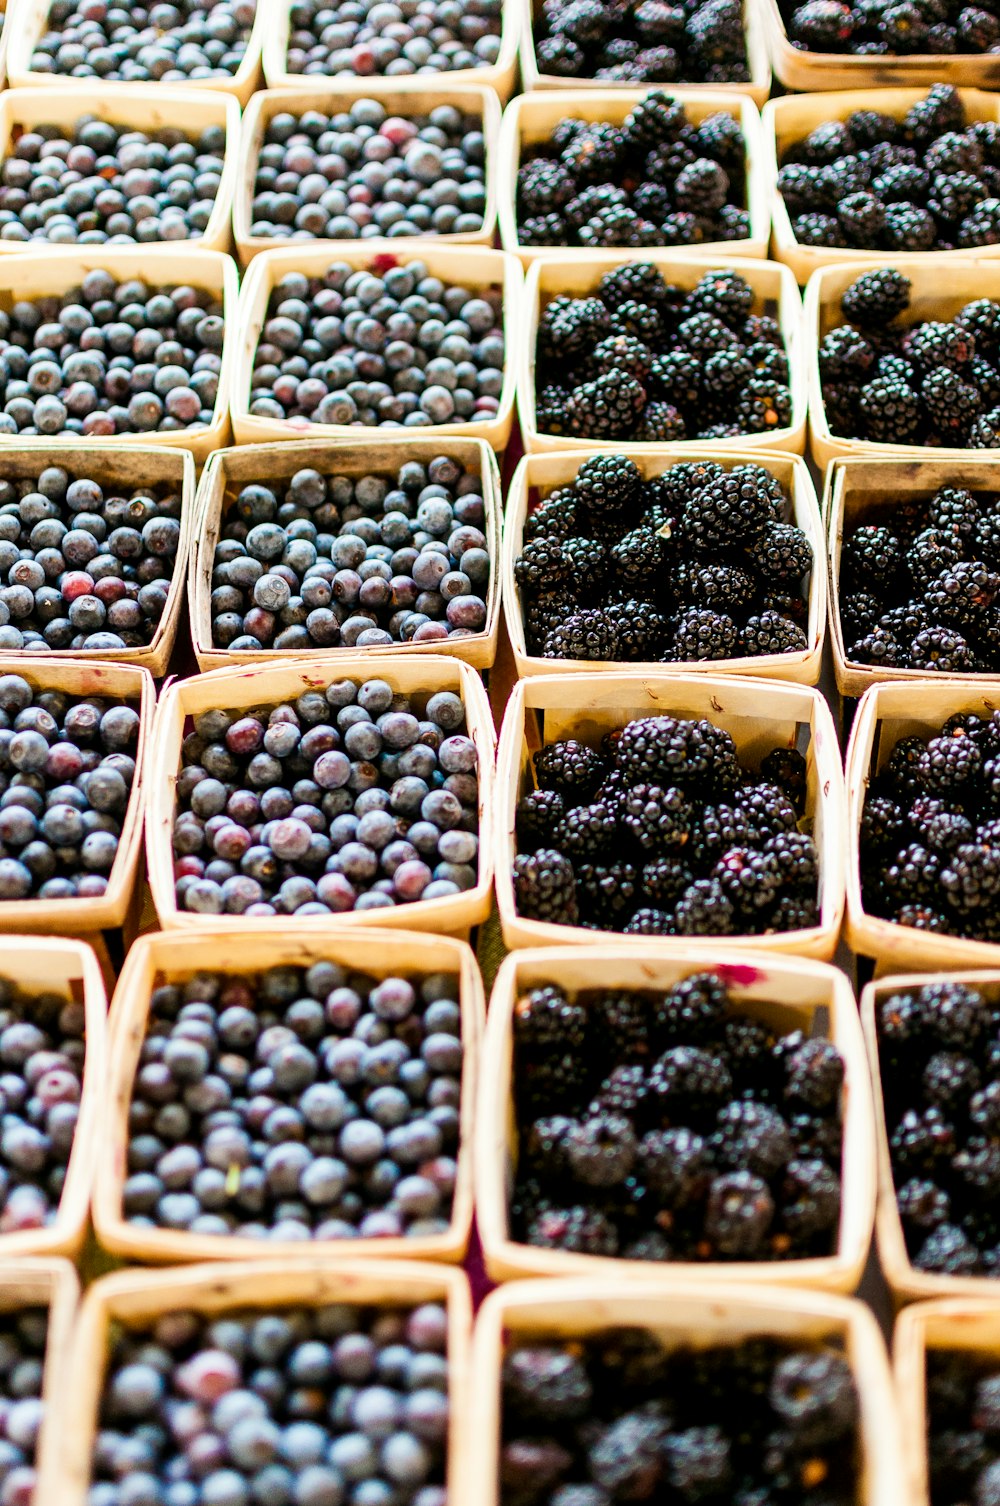 blackberry and blueberry fruits